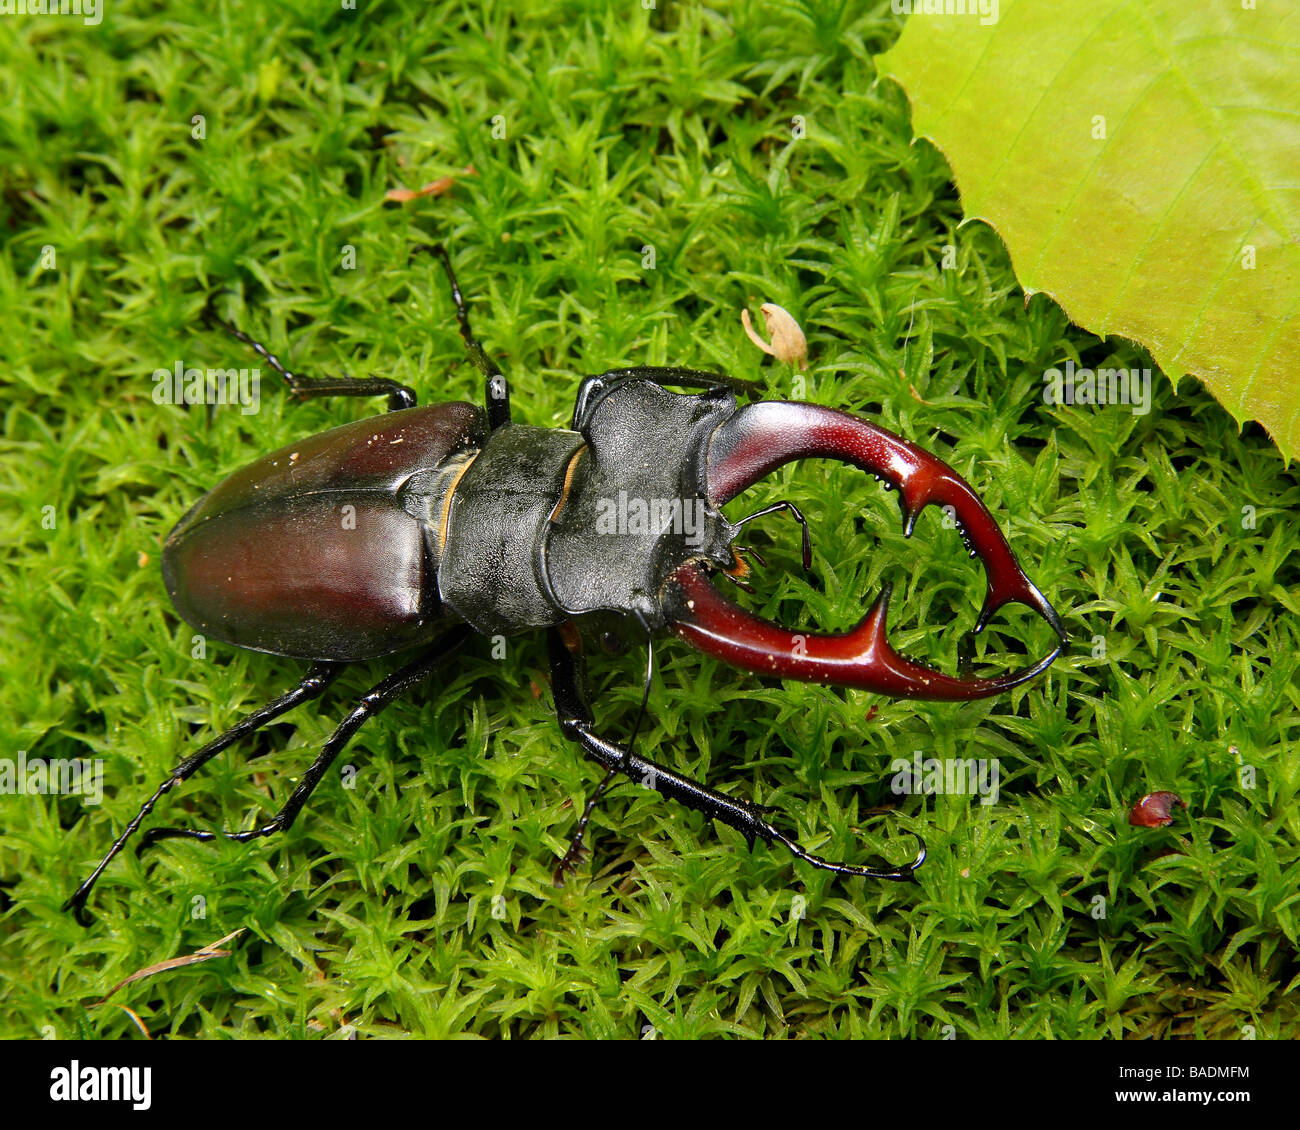 A male Stag beetle on moss Limousin France Stock Photo